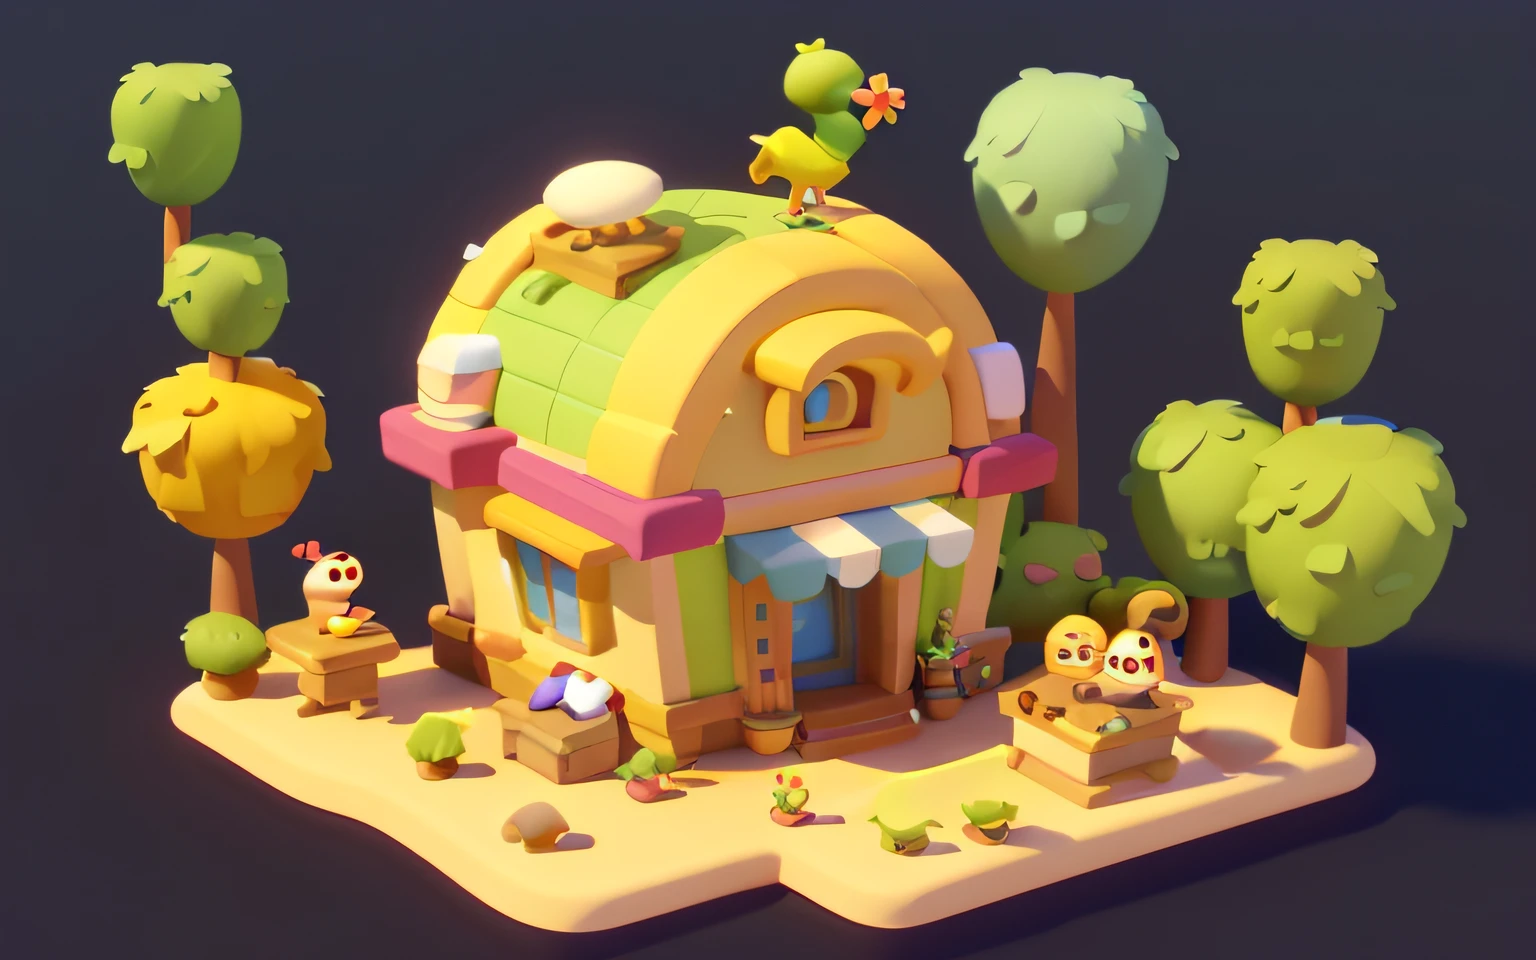 Cartoony，Lovely dessert building，There are cute dinosaurs next to it，Gromurosaurus，tyrannosarus rex，pixar-style，cartoonish style， polygon， Dinosaur building，，adolable， Game architectural design， fanciful， Charming concert hall， desks， music instrument， steins， Bricks， grassy， florals， the trees， casual game style， Originality， best detail， 。.。.3D， Blander， tmasterpiece， best qualtiy， toon rendering， 8K